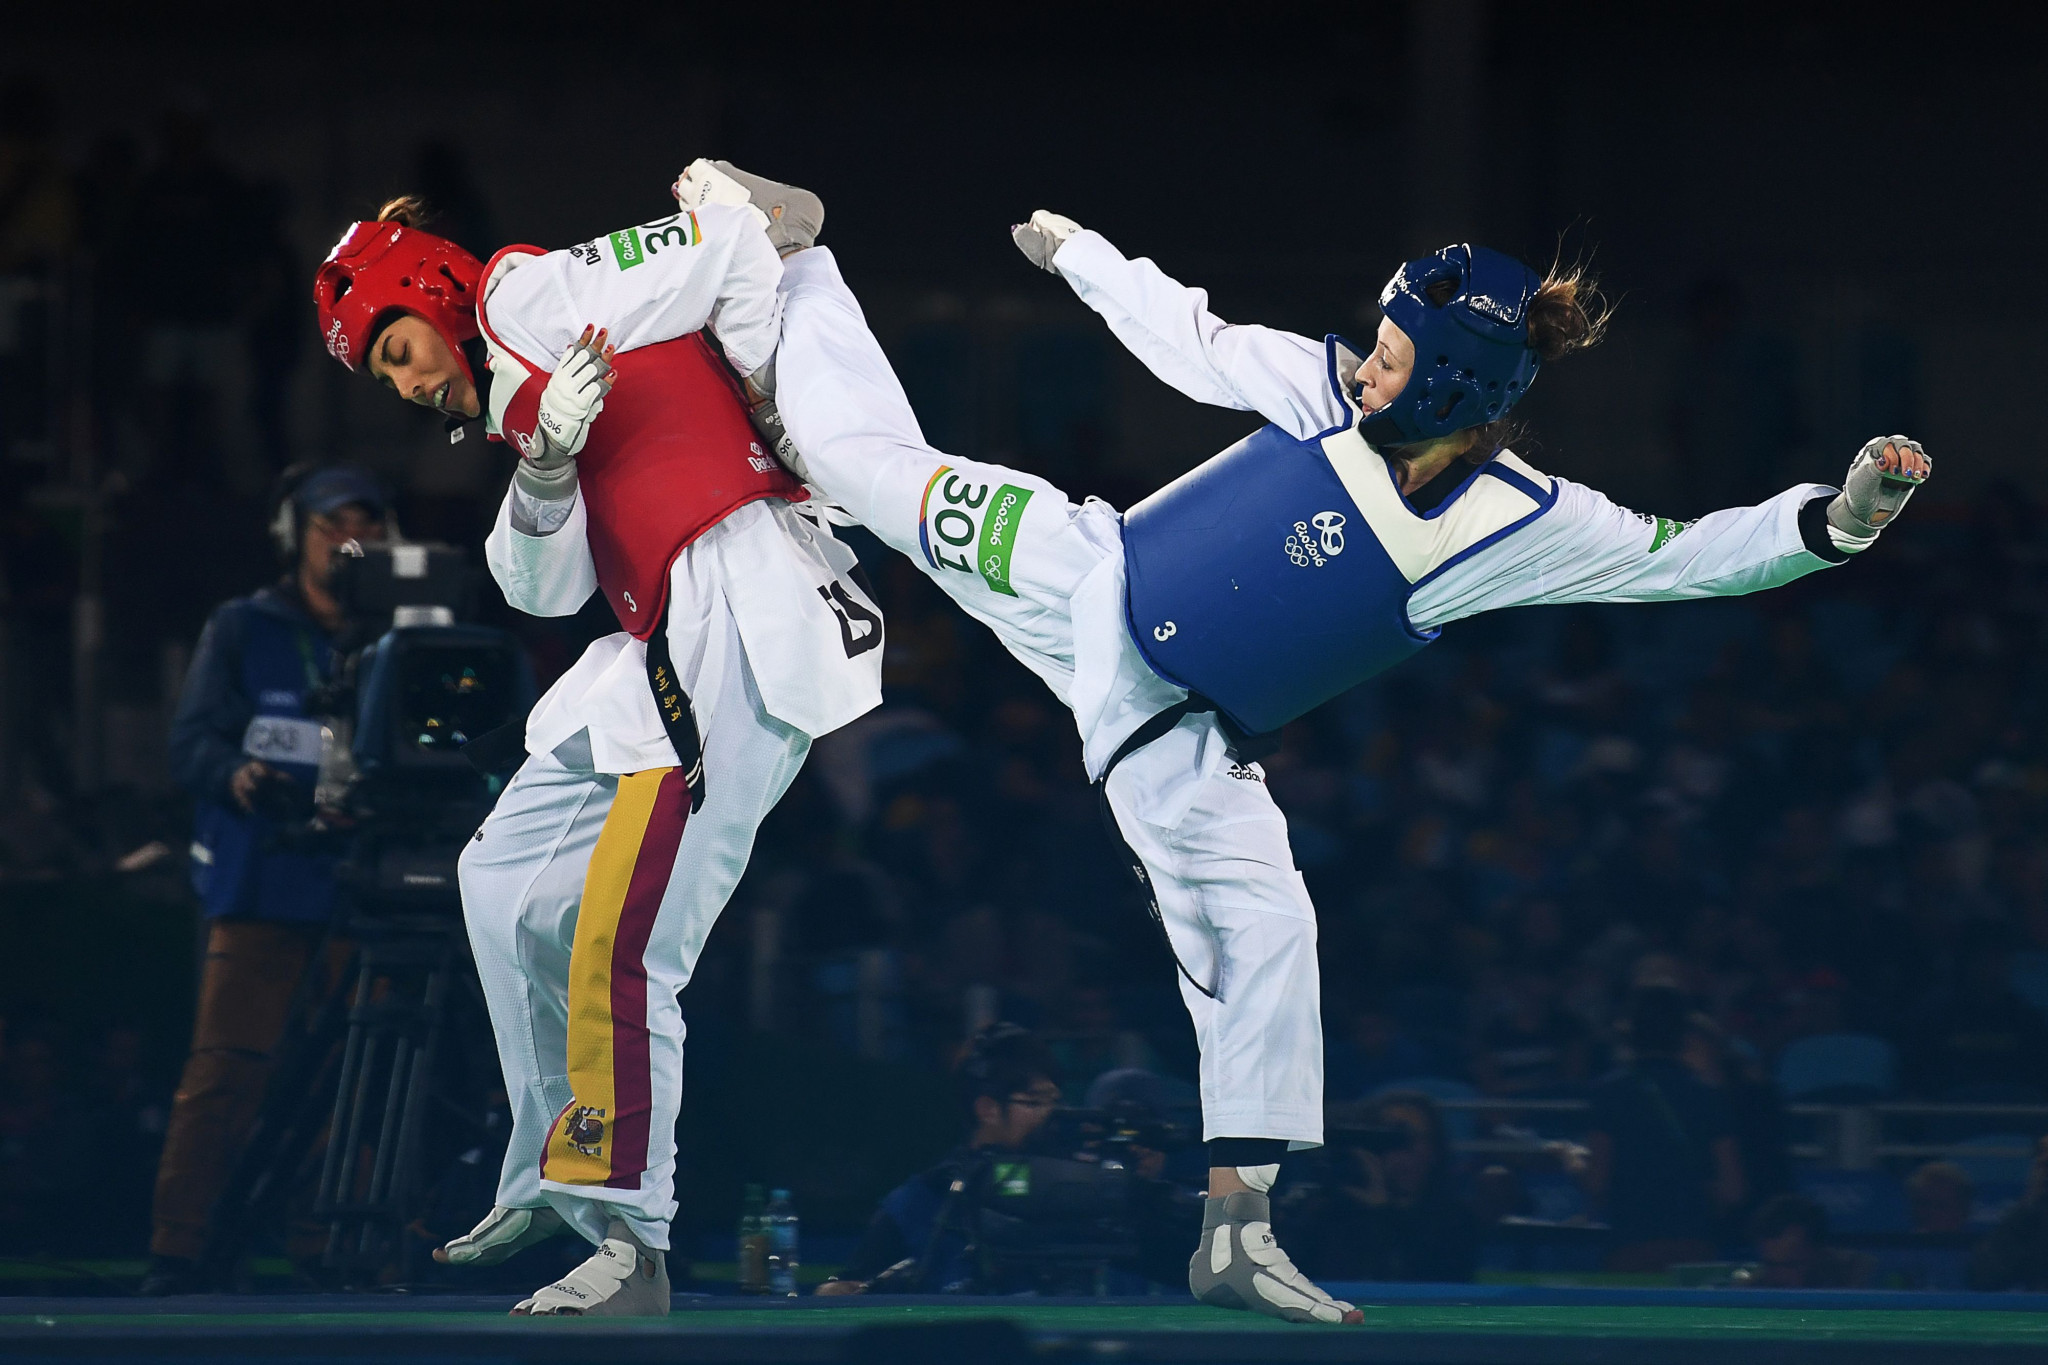 Double Olympic champion Jade Jones is among the British athletes set to compete at the World Taekwondo Grand Prix in London ©Getty Images